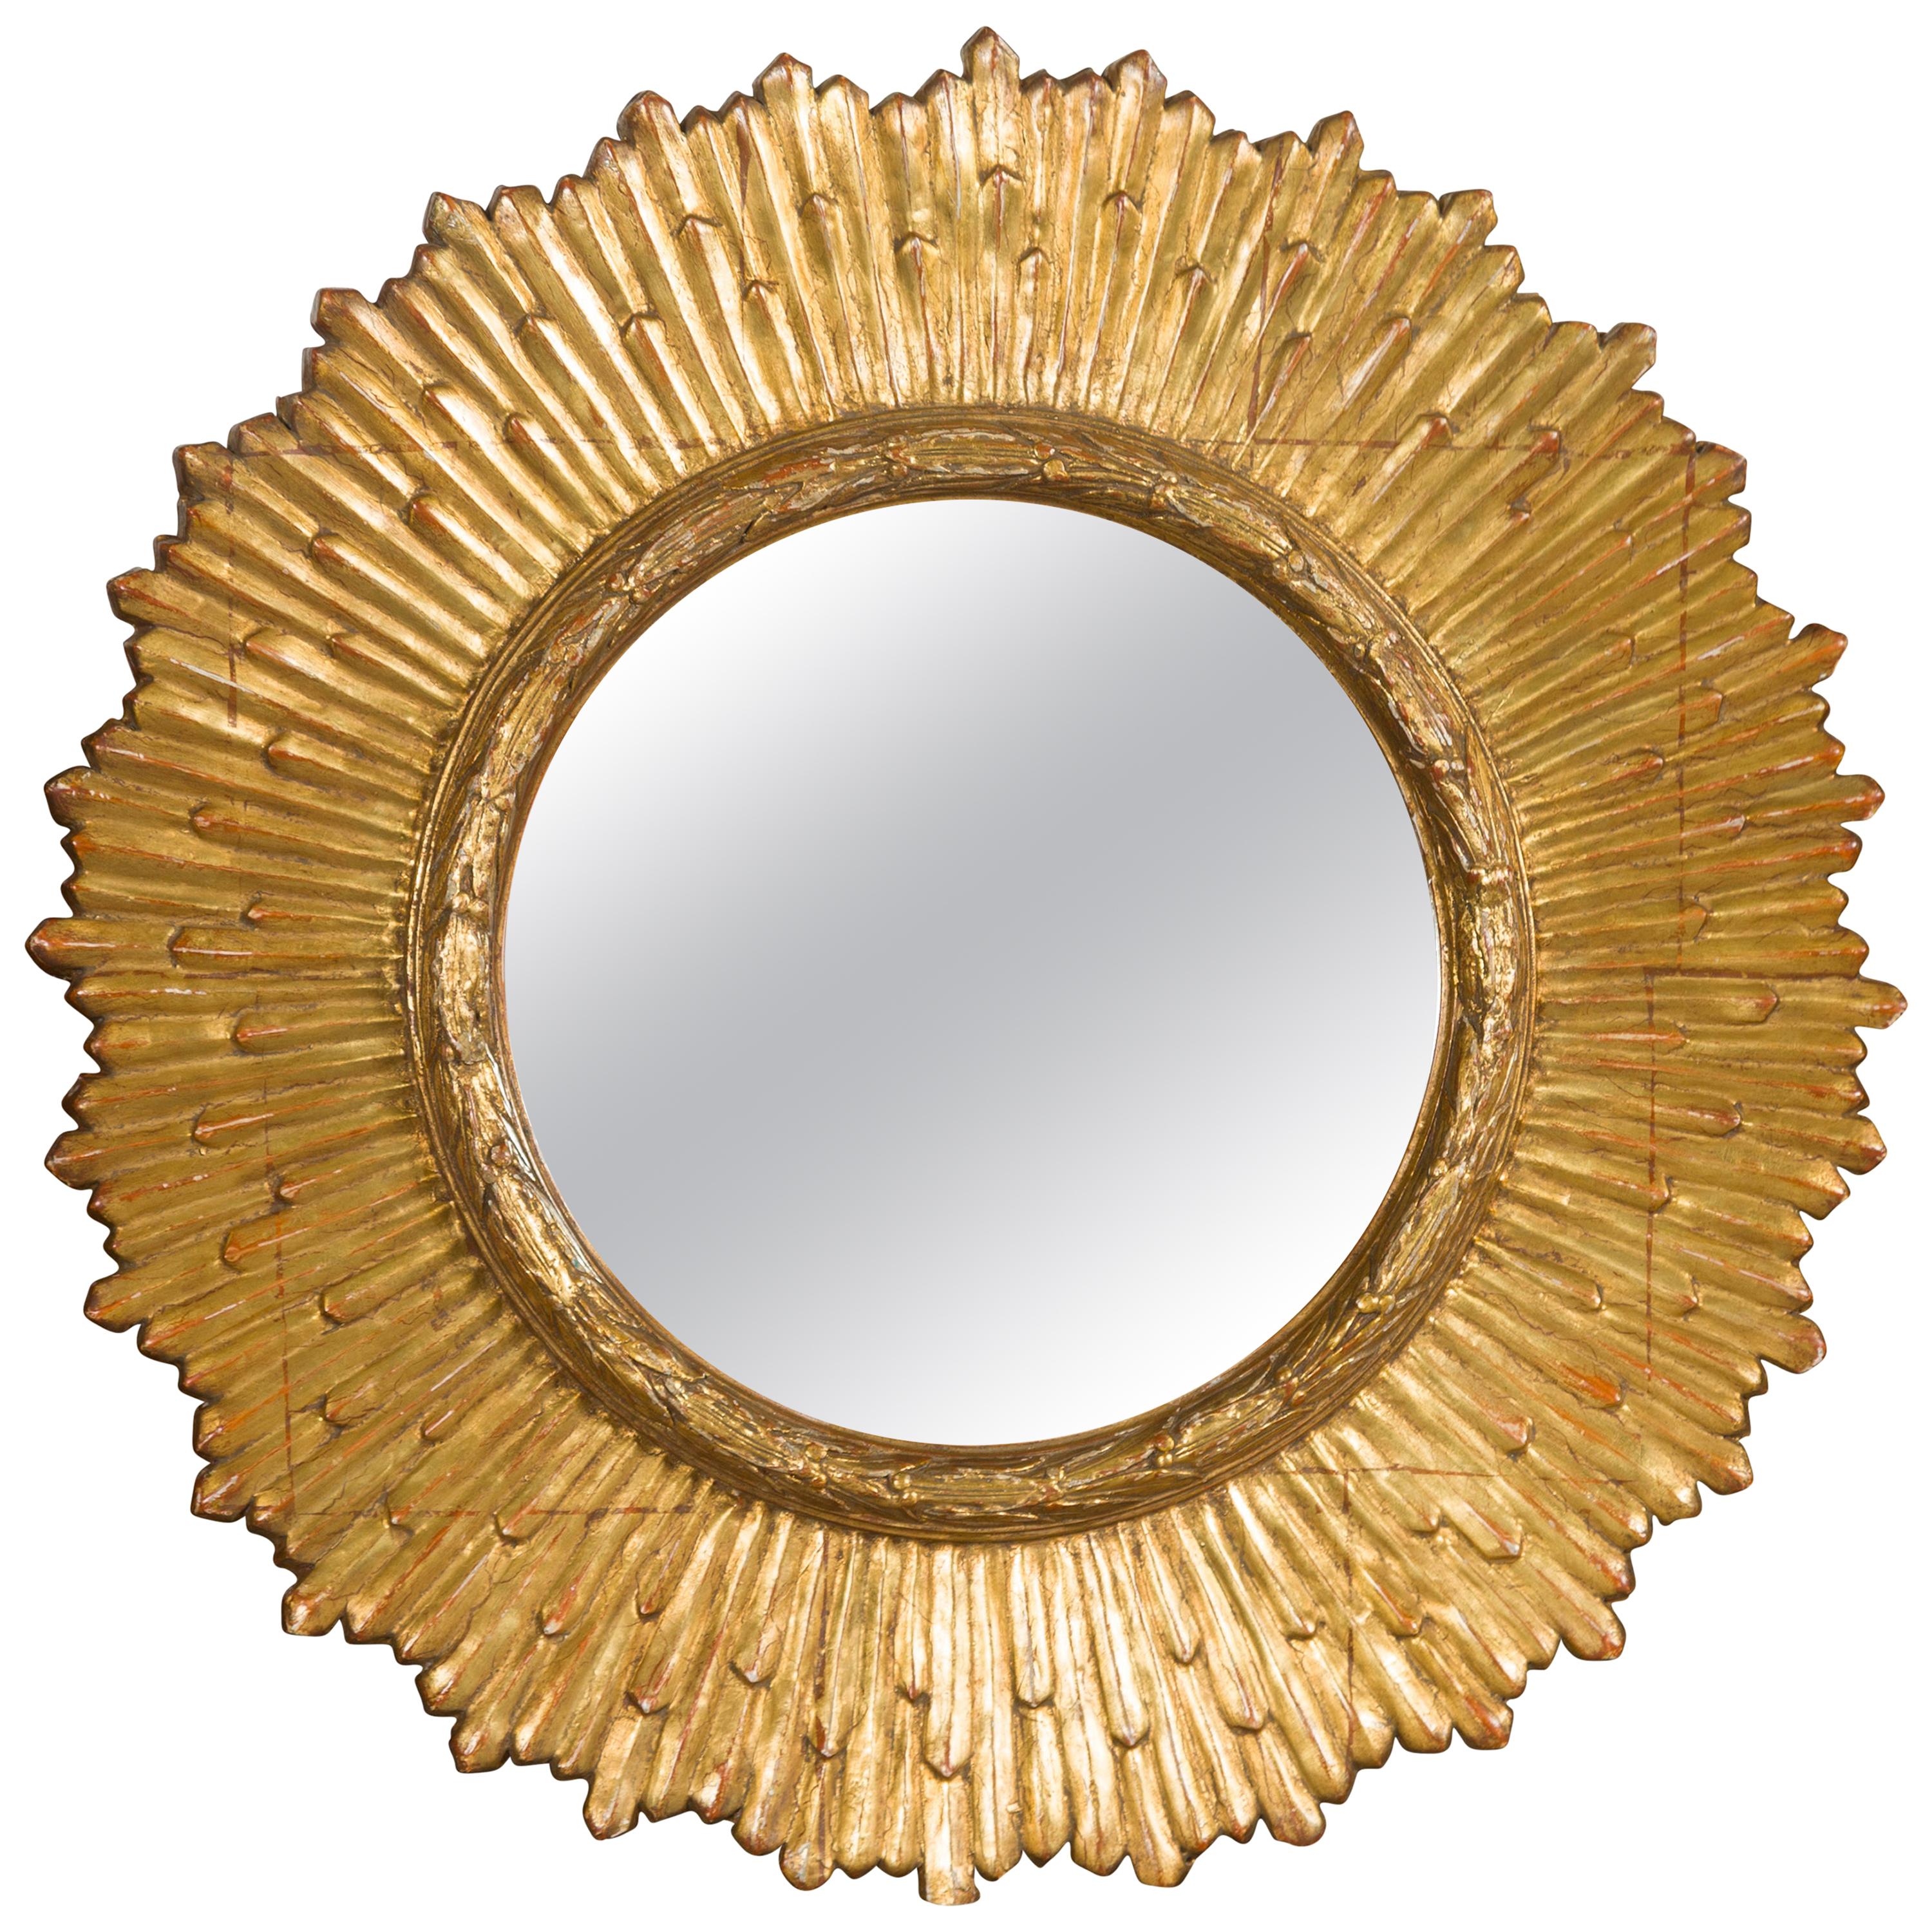 French Midcentury Giltwood Sunburst Mirror with Radiating Rays and Carved Frame